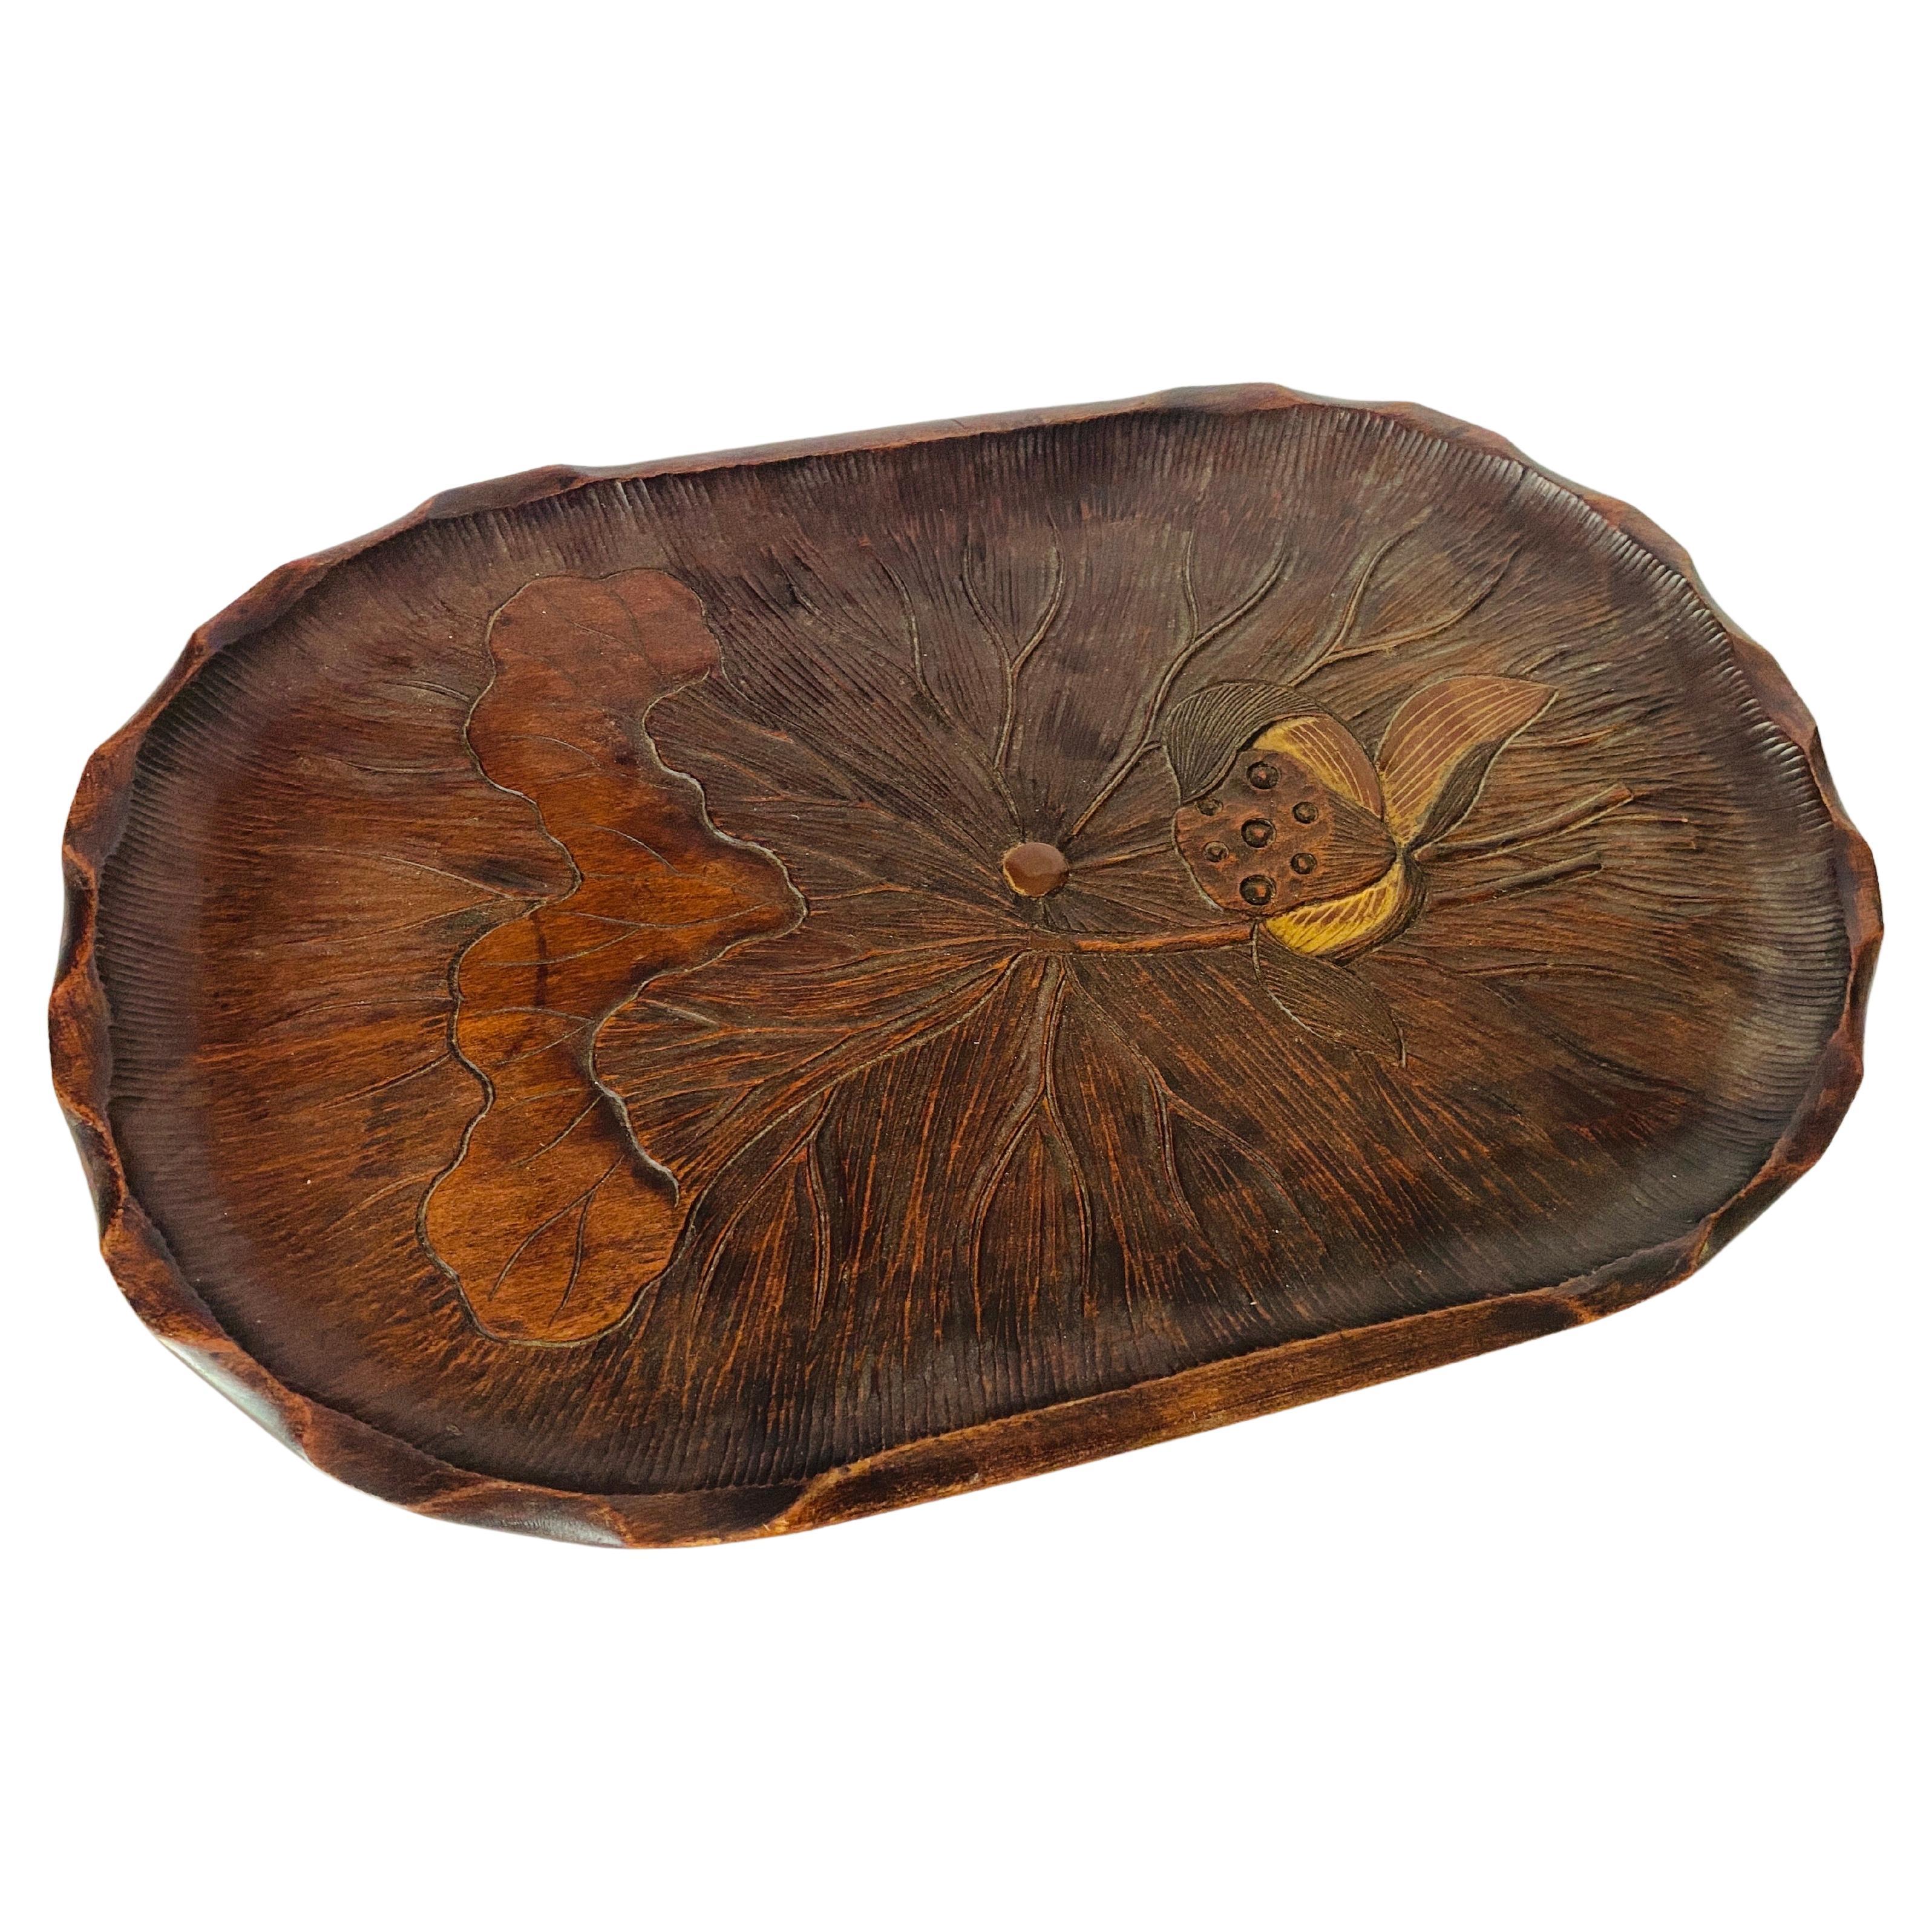 Art Nouveau Platter in Wood, Brown Color, France circa 1930, Hand Carved